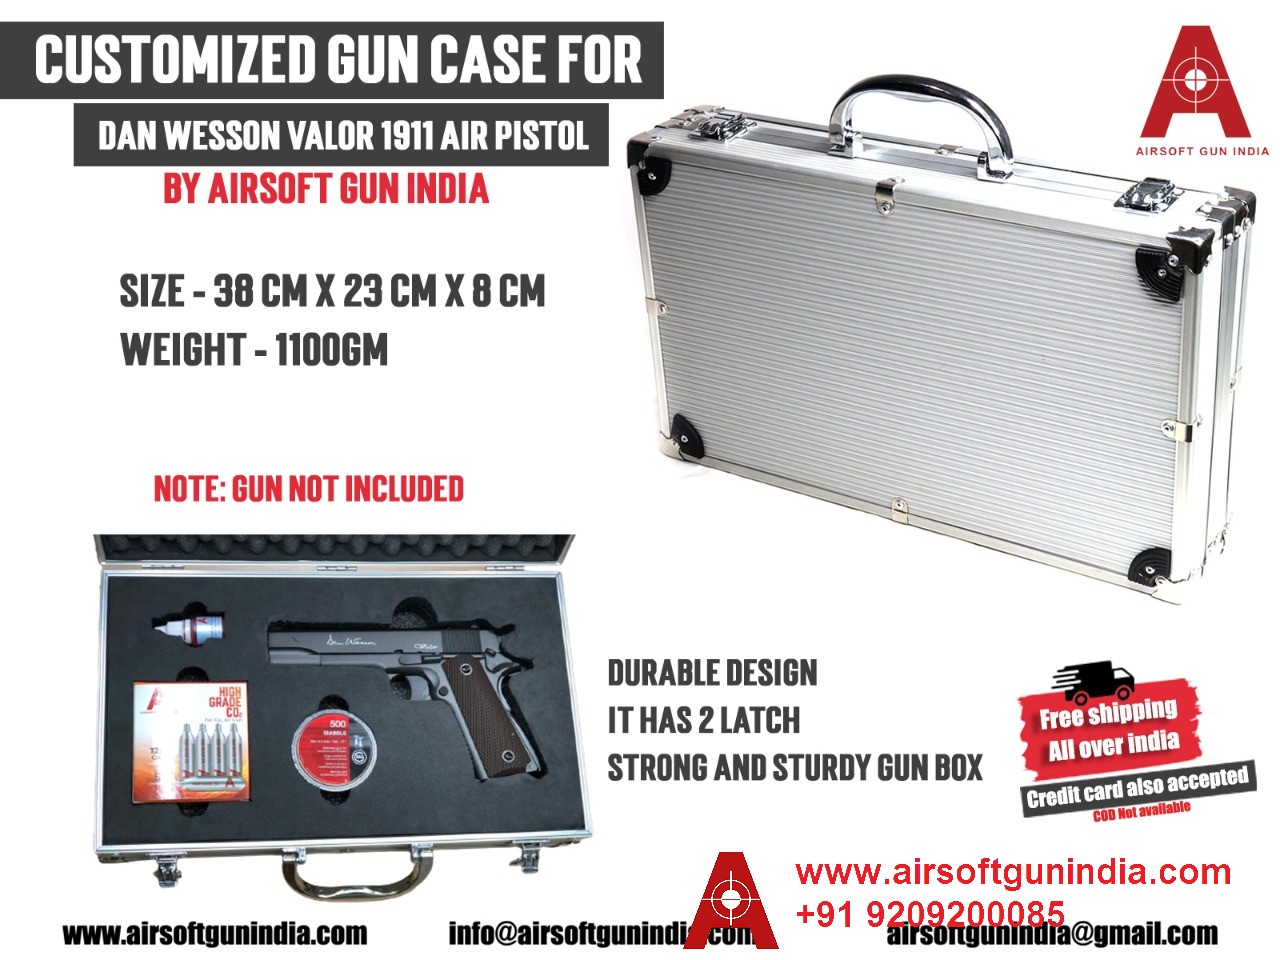 Customized Gun Case For ASG Dan Wesson Valor 1911 Full Metal Co2 Pellet Pistol By Airsoft Gun India